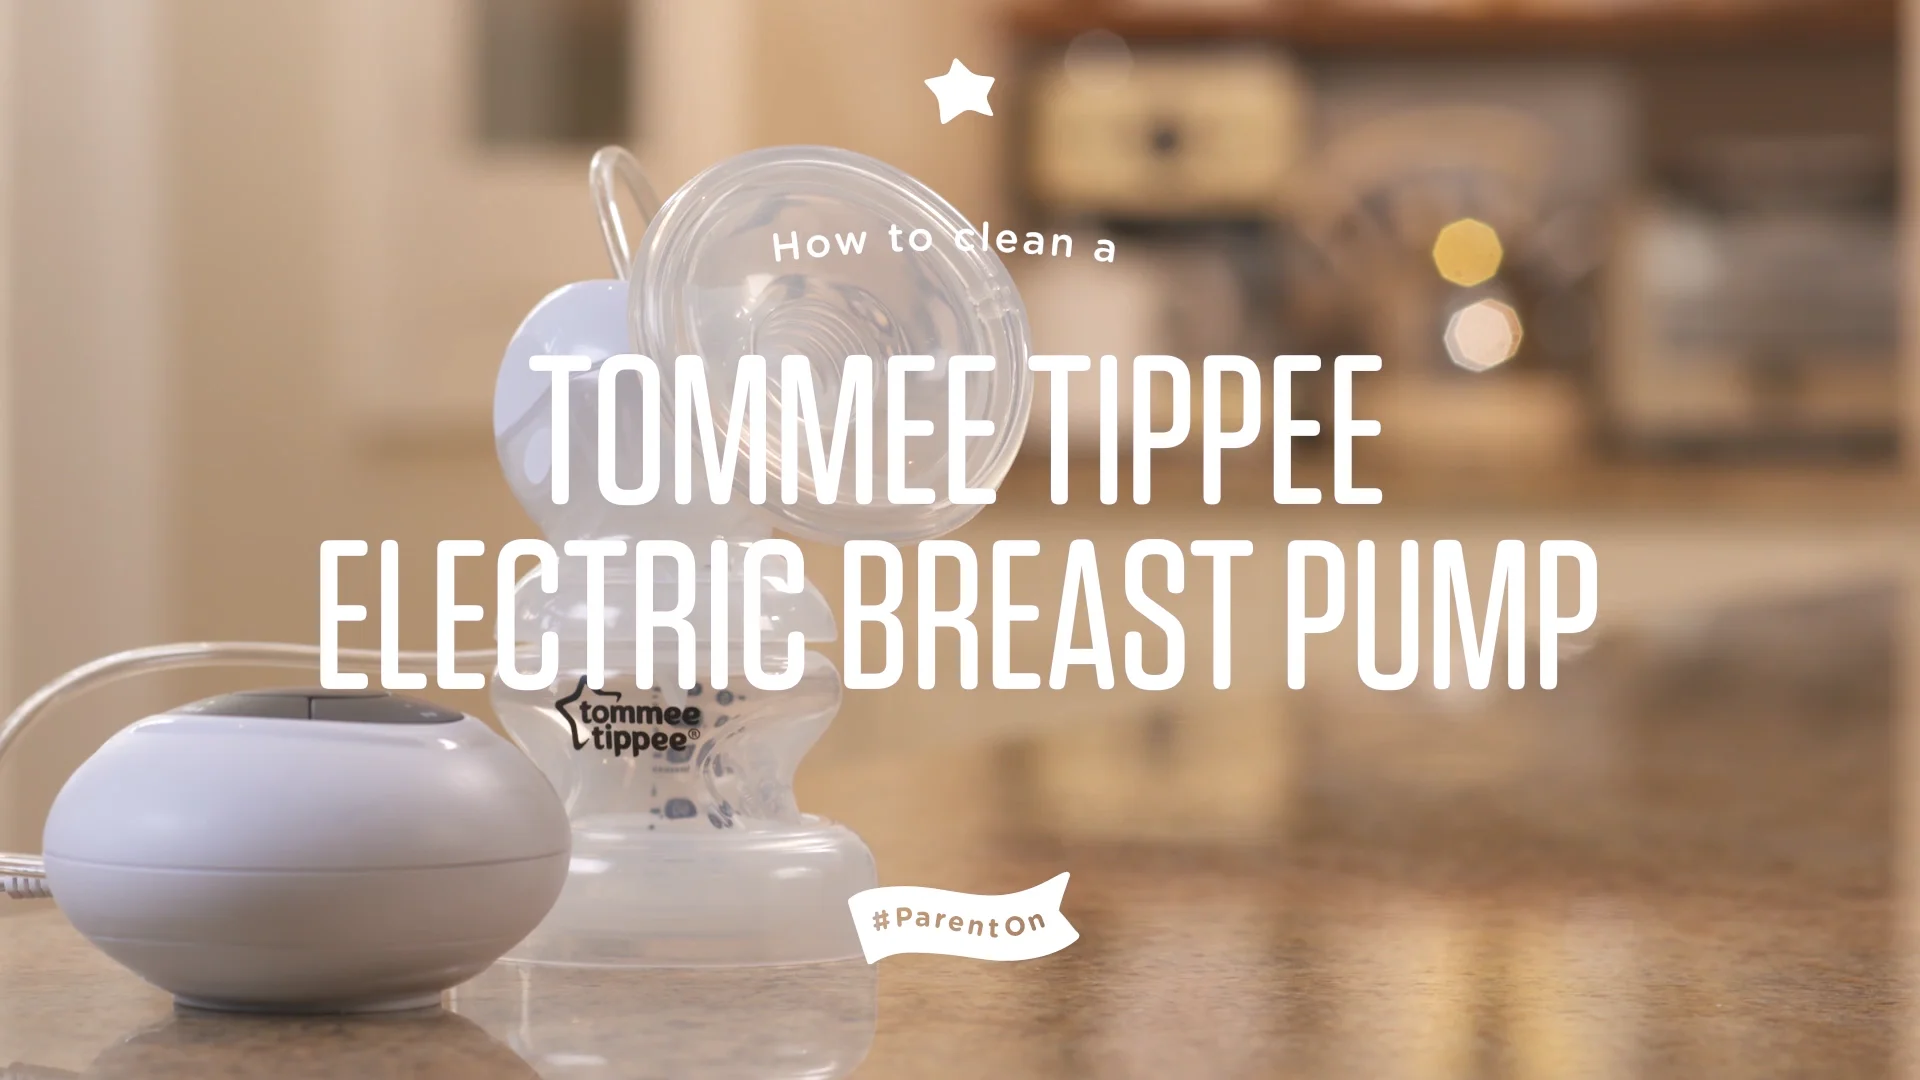 How to clean the Tommee Tippee Electric Breast Pump on Vimeo